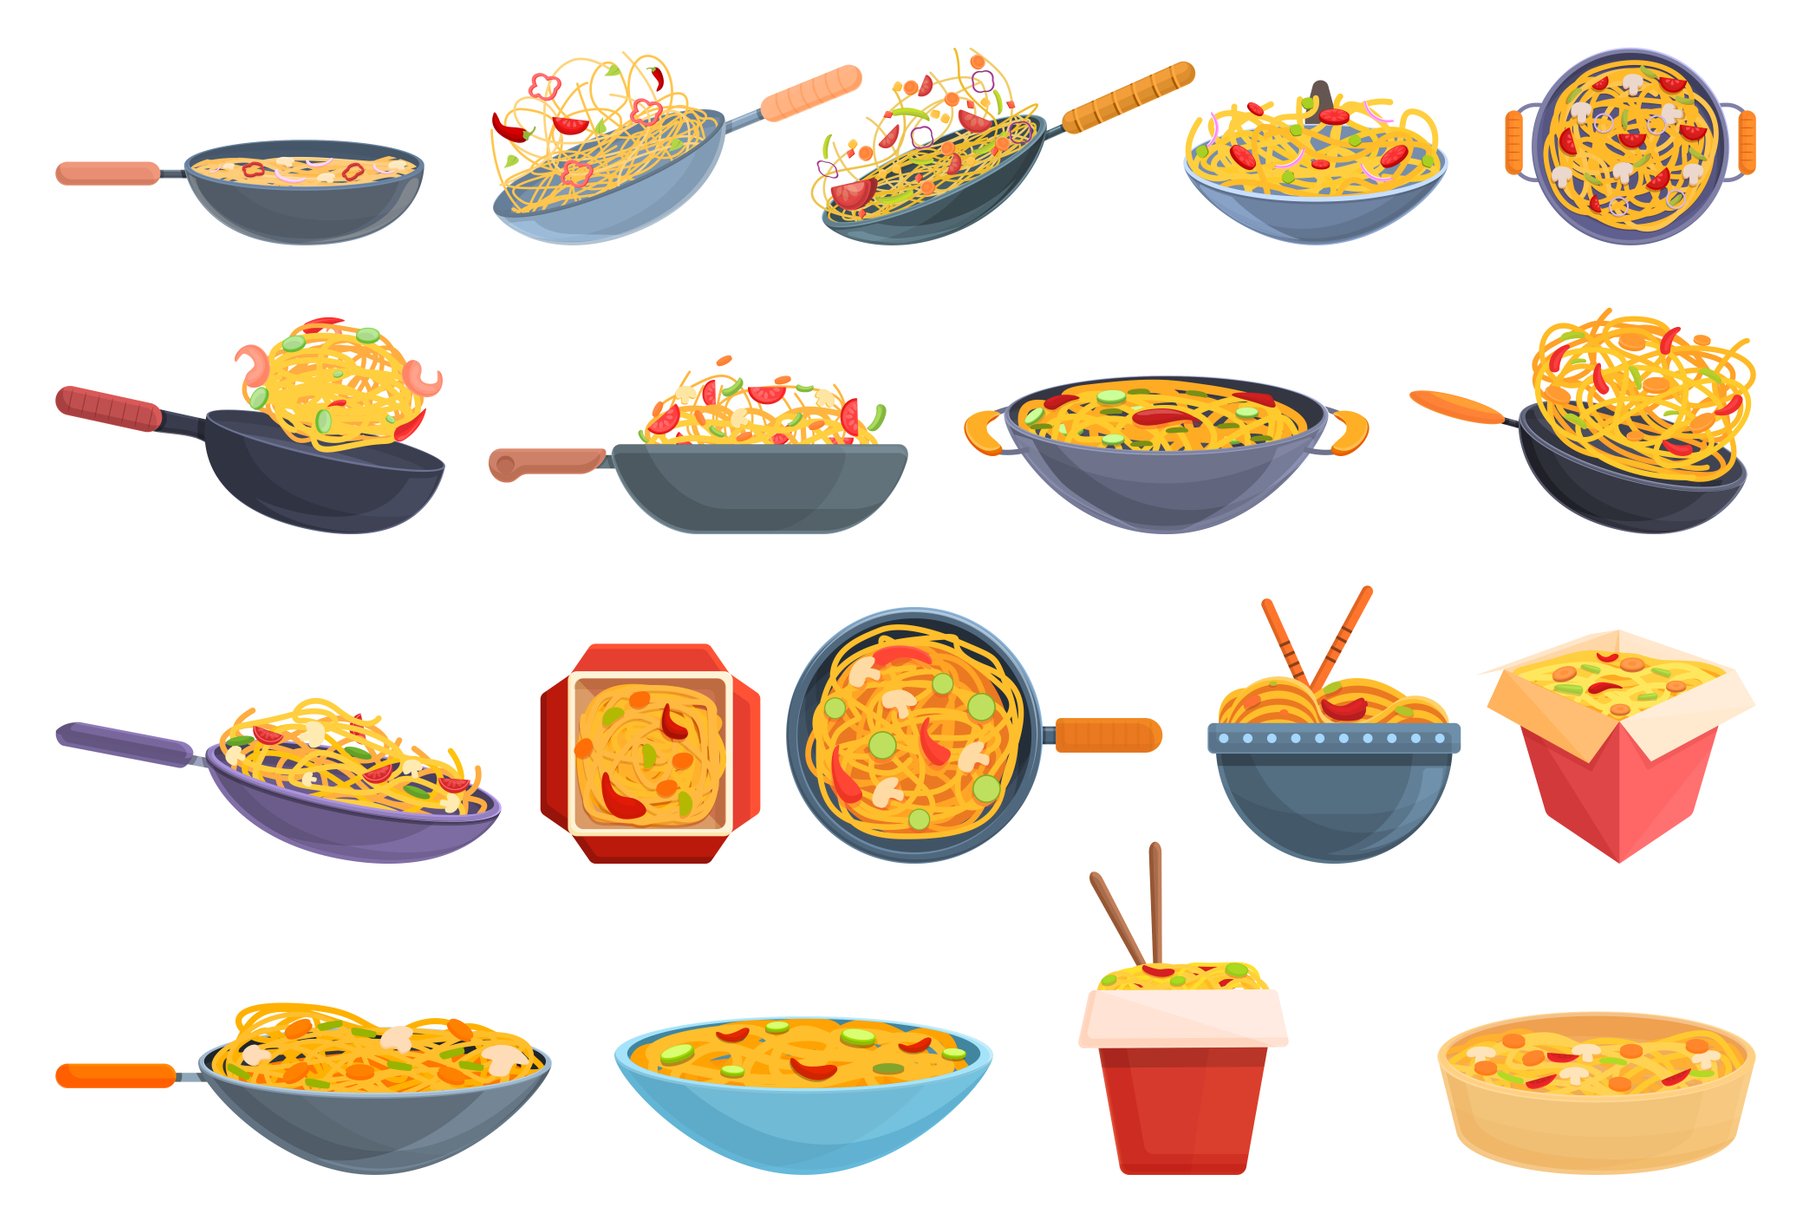 Cool thai food illustrations for ypur purposes.